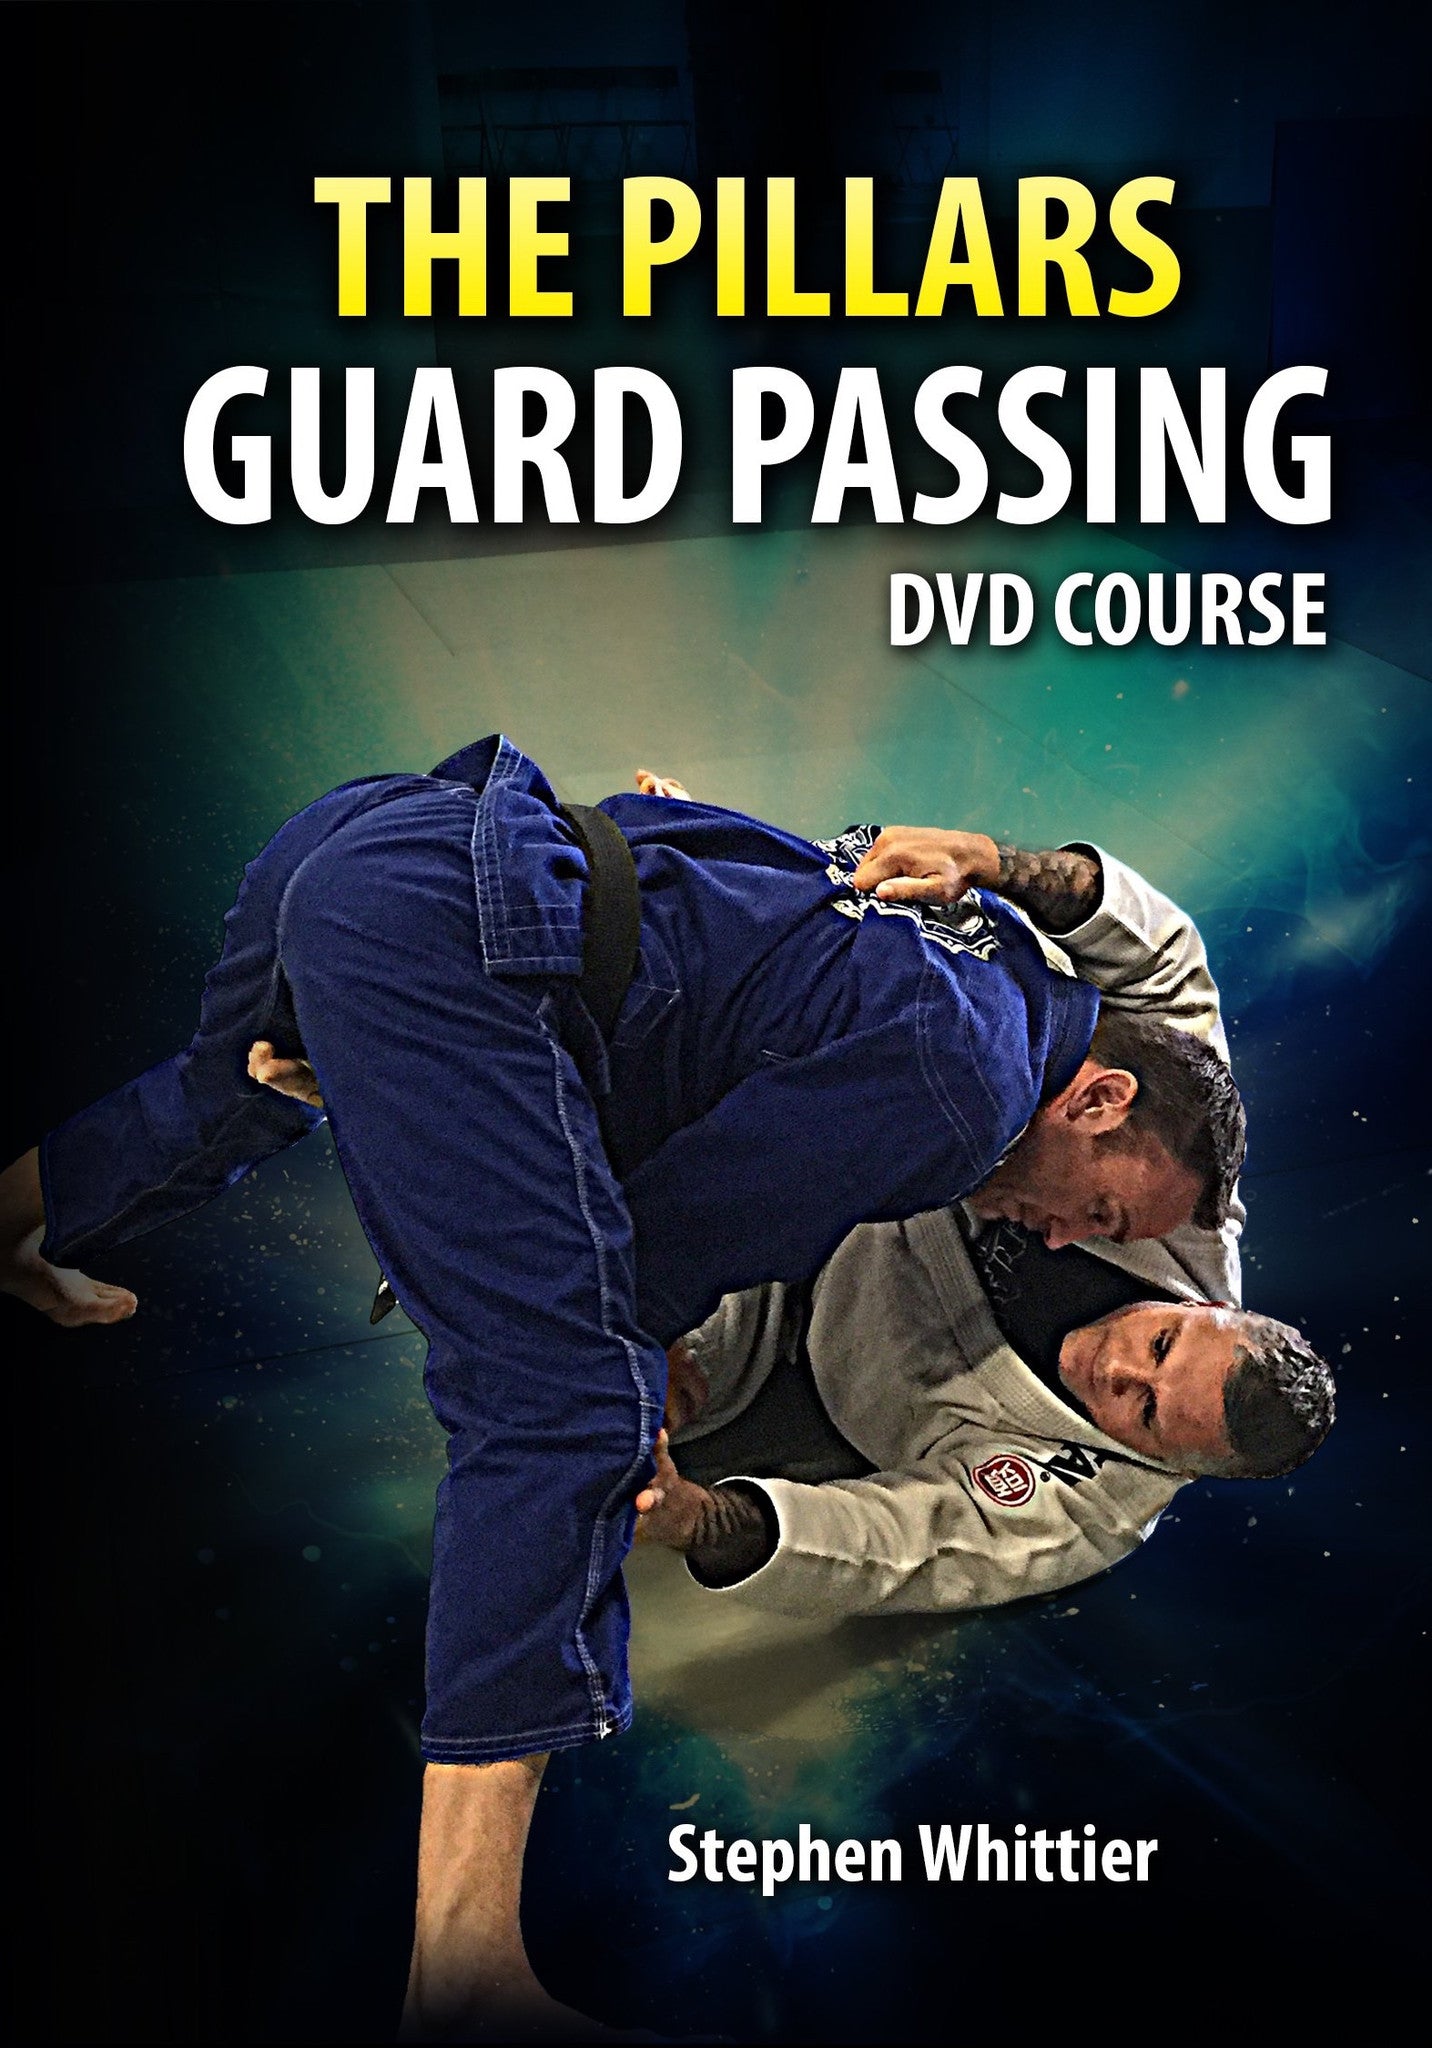 The Pillars: Guard Passing Course 5 DVD Set by Stephen Whittier - Budovideos Inc